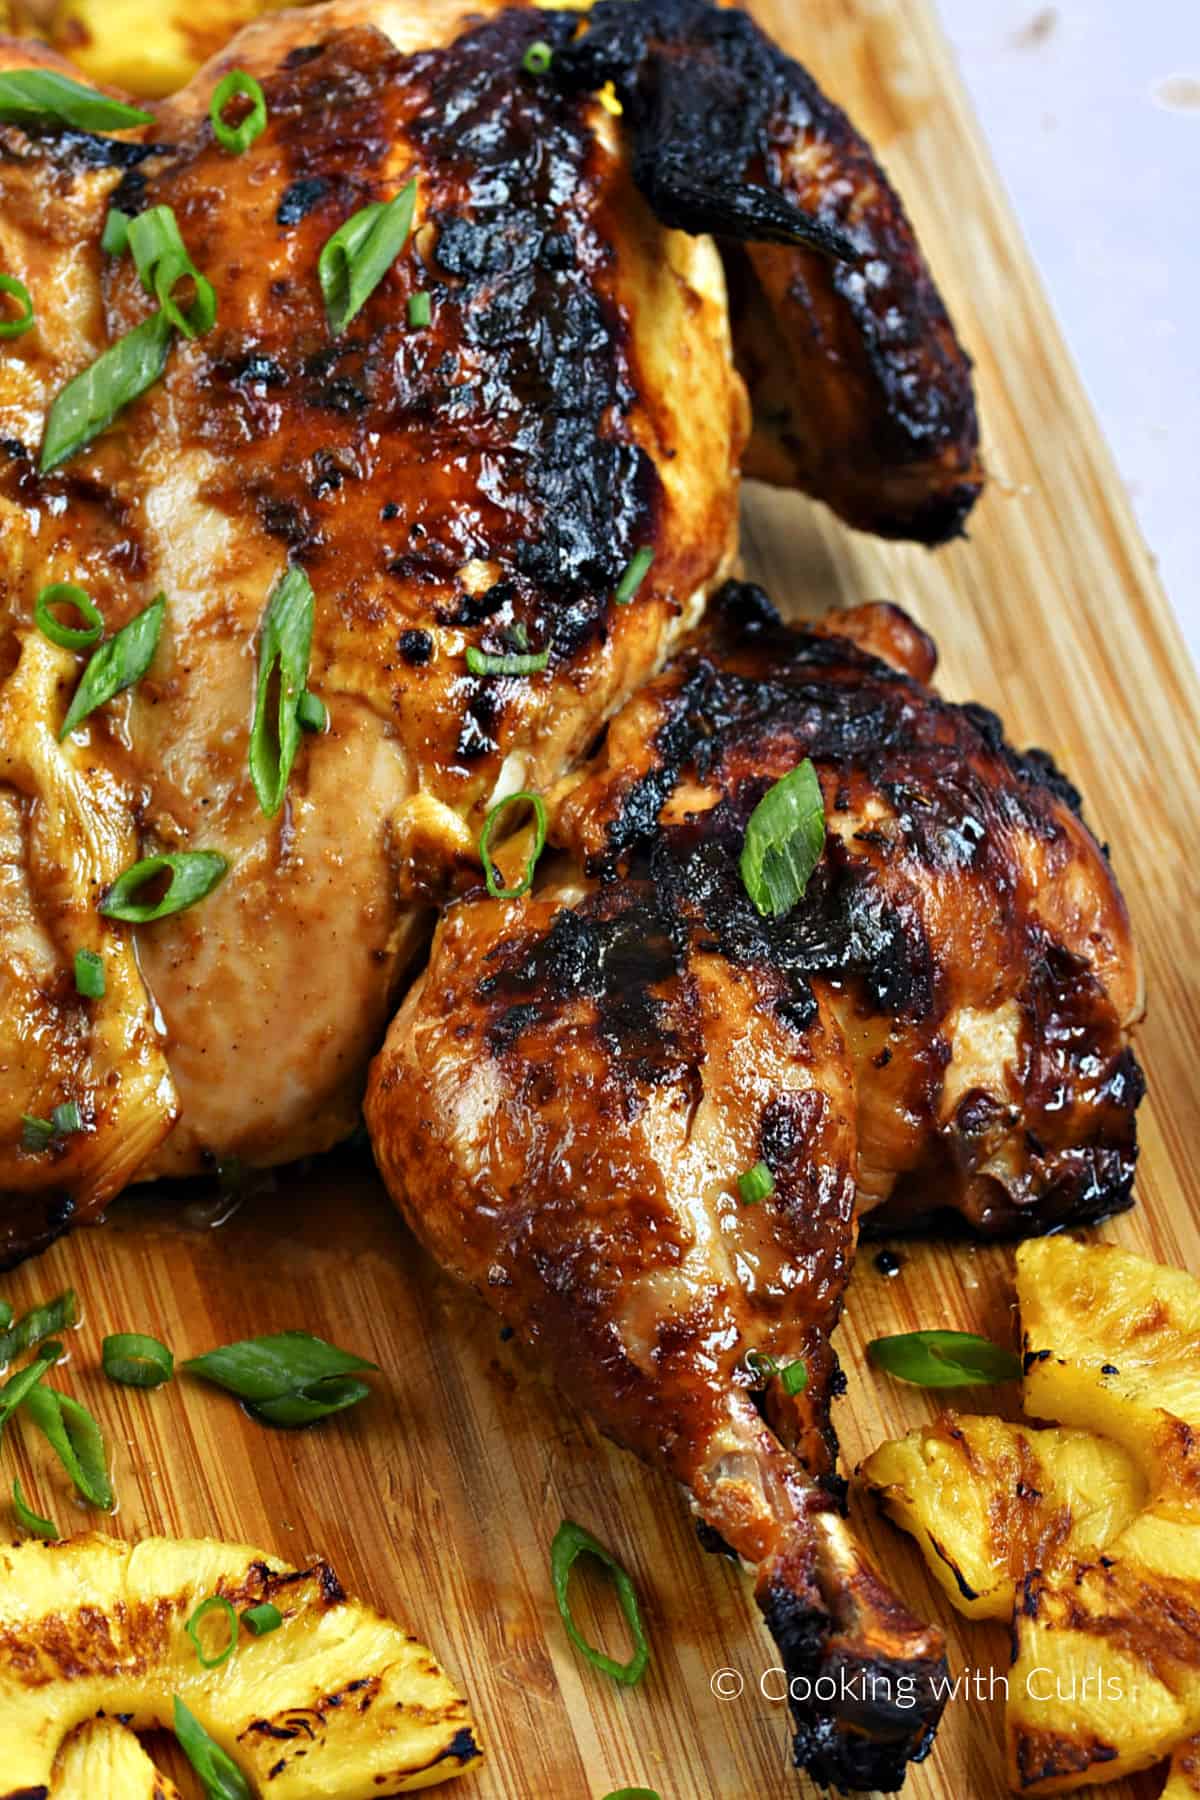 A close-up image of the right leg on a grilled whole chicken with sliced pineapple on a cutting board.